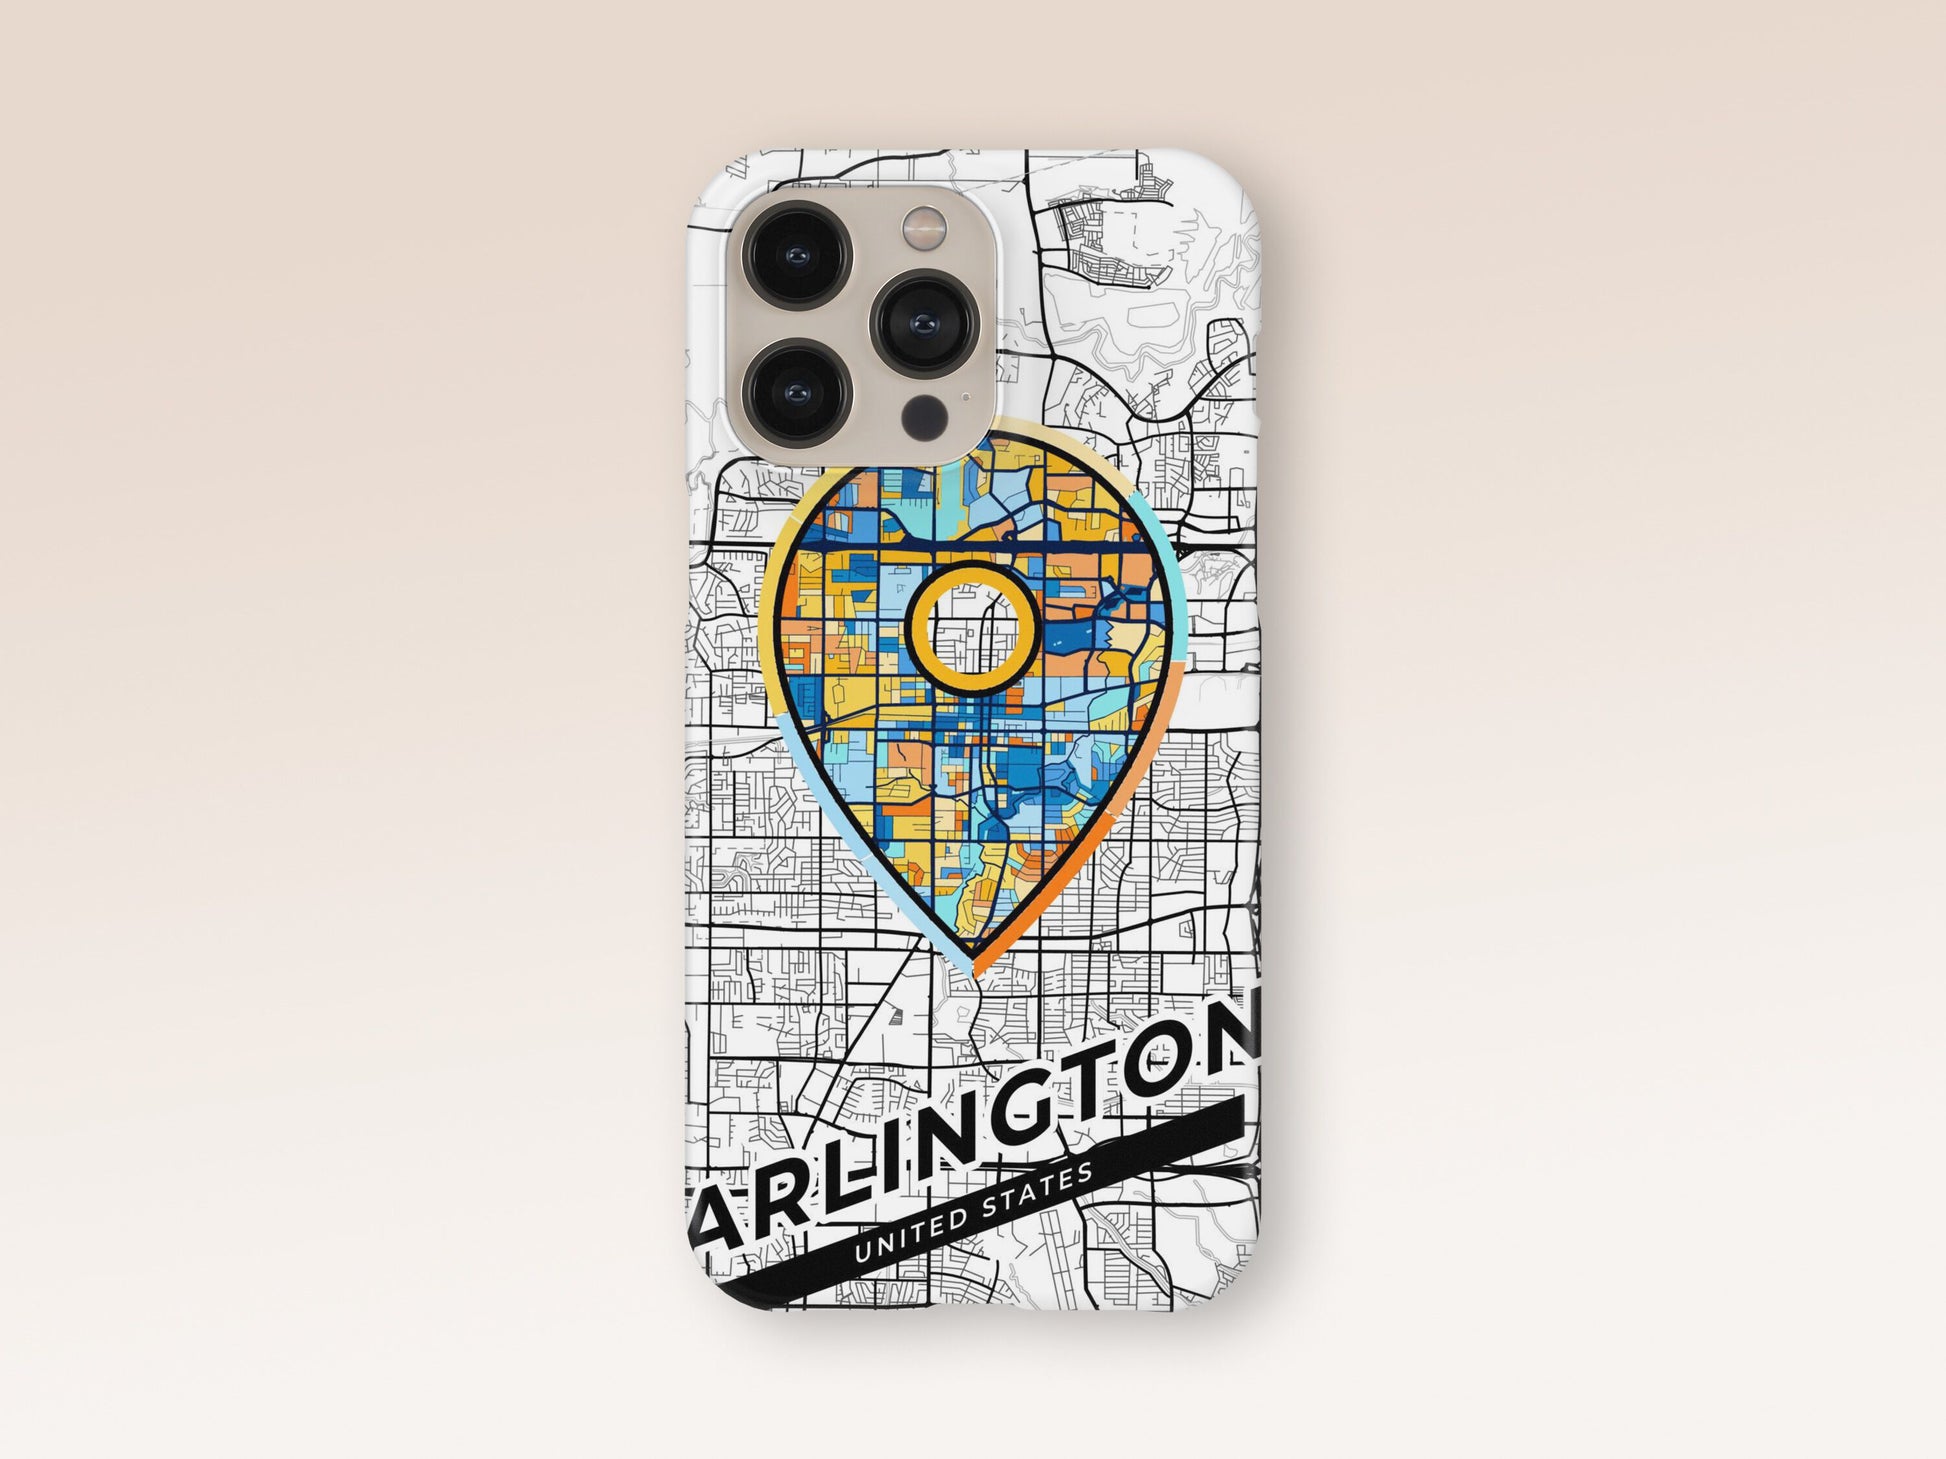 Arlington Texas slim phone case with colorful icon. Birthday, wedding or housewarming gift. Couple match cases. 1